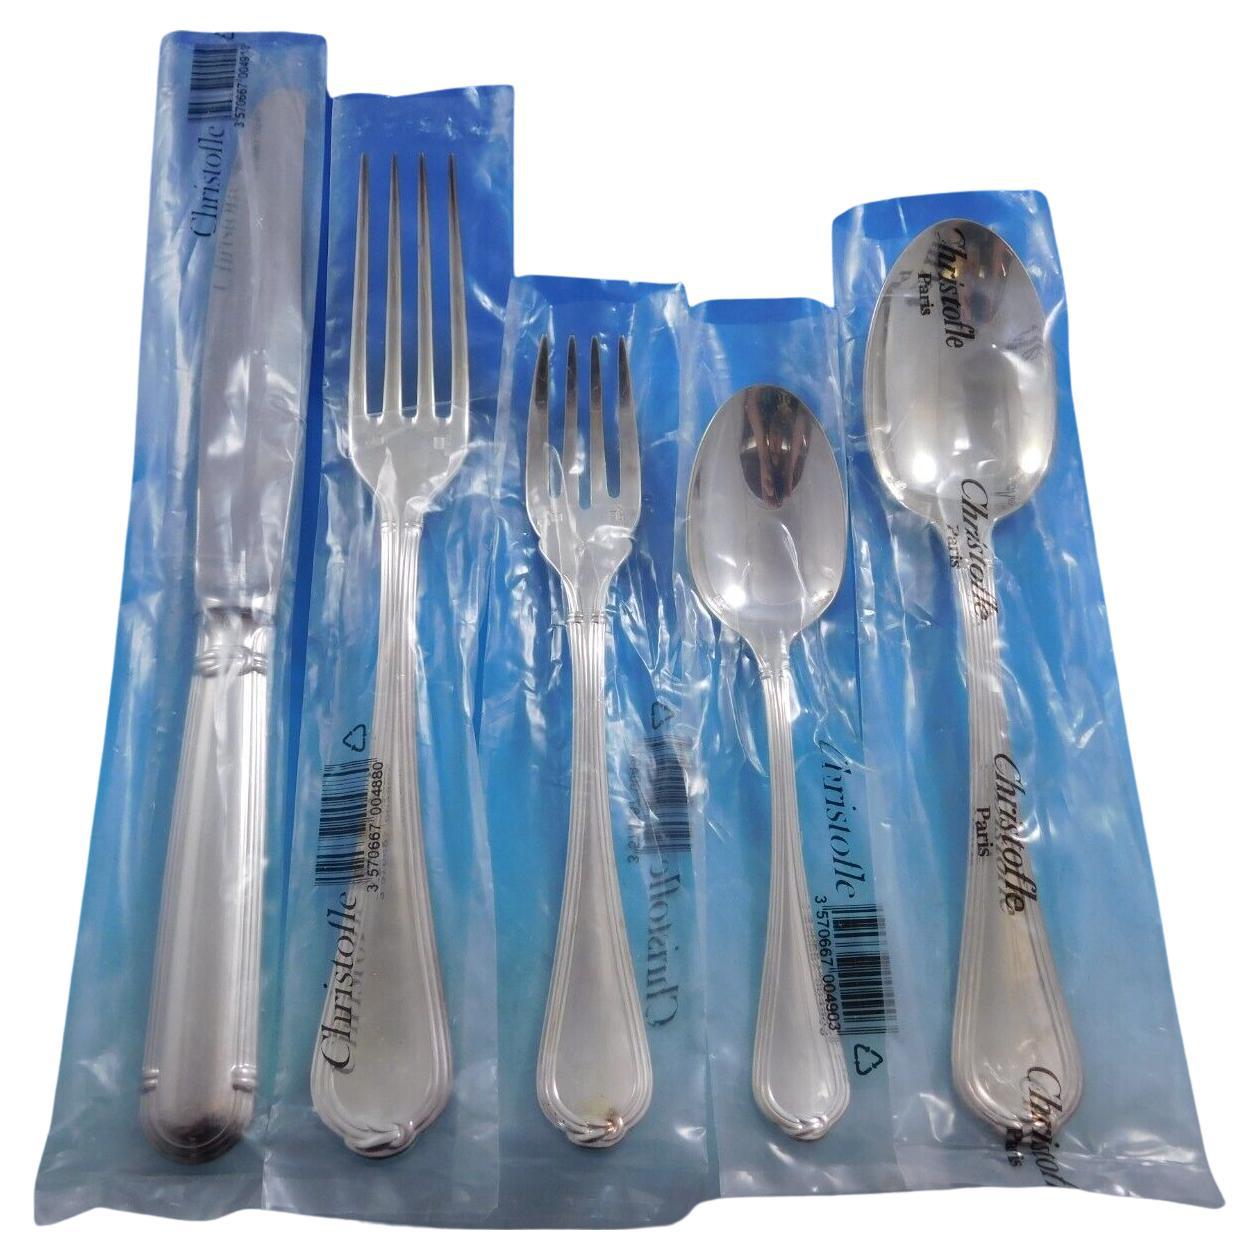 Oceana by Christofle France Silverplated Flatware Set 6 Service 30 pcs Dinner FS For Sale